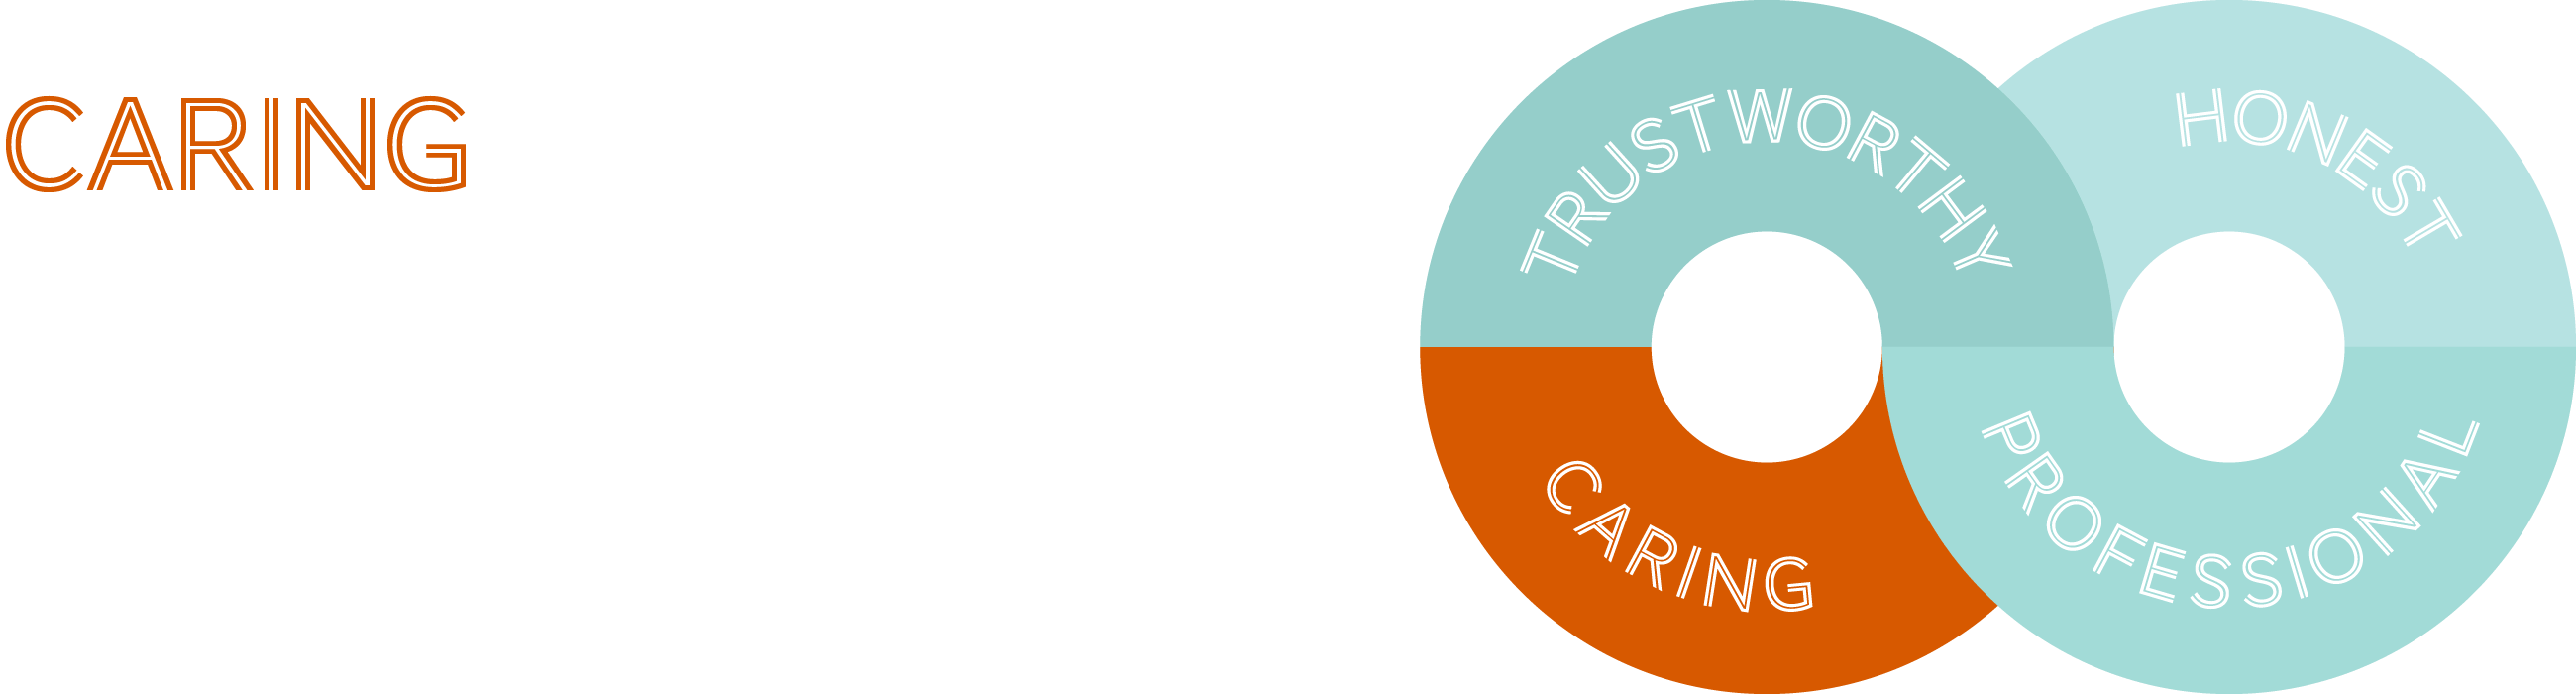 banner showing the core value of protect insurance highlighting caring